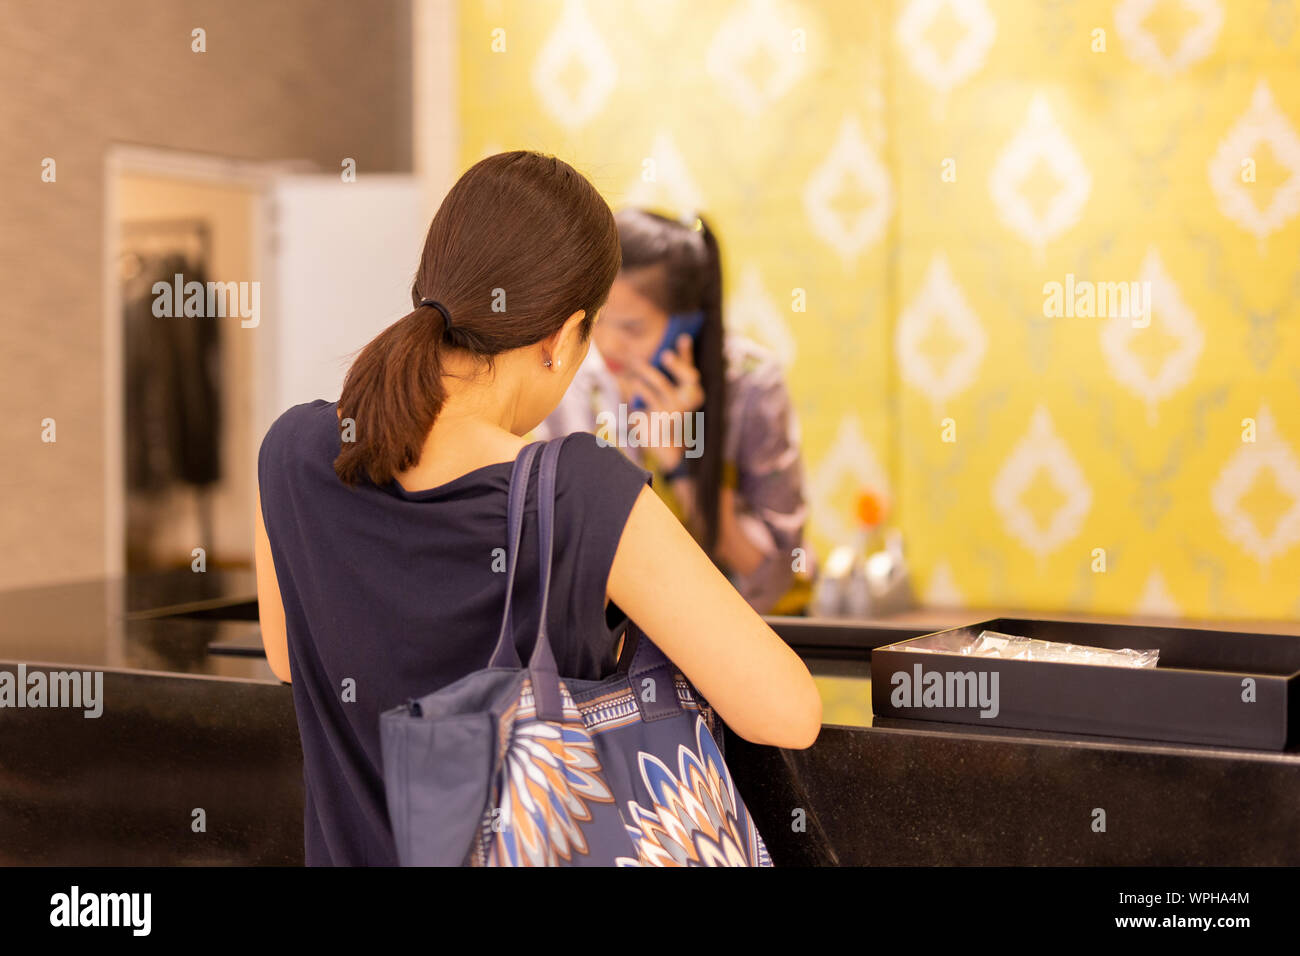 Woman at checkout in clothing store with staff on the phone enquiry. Stock Photo